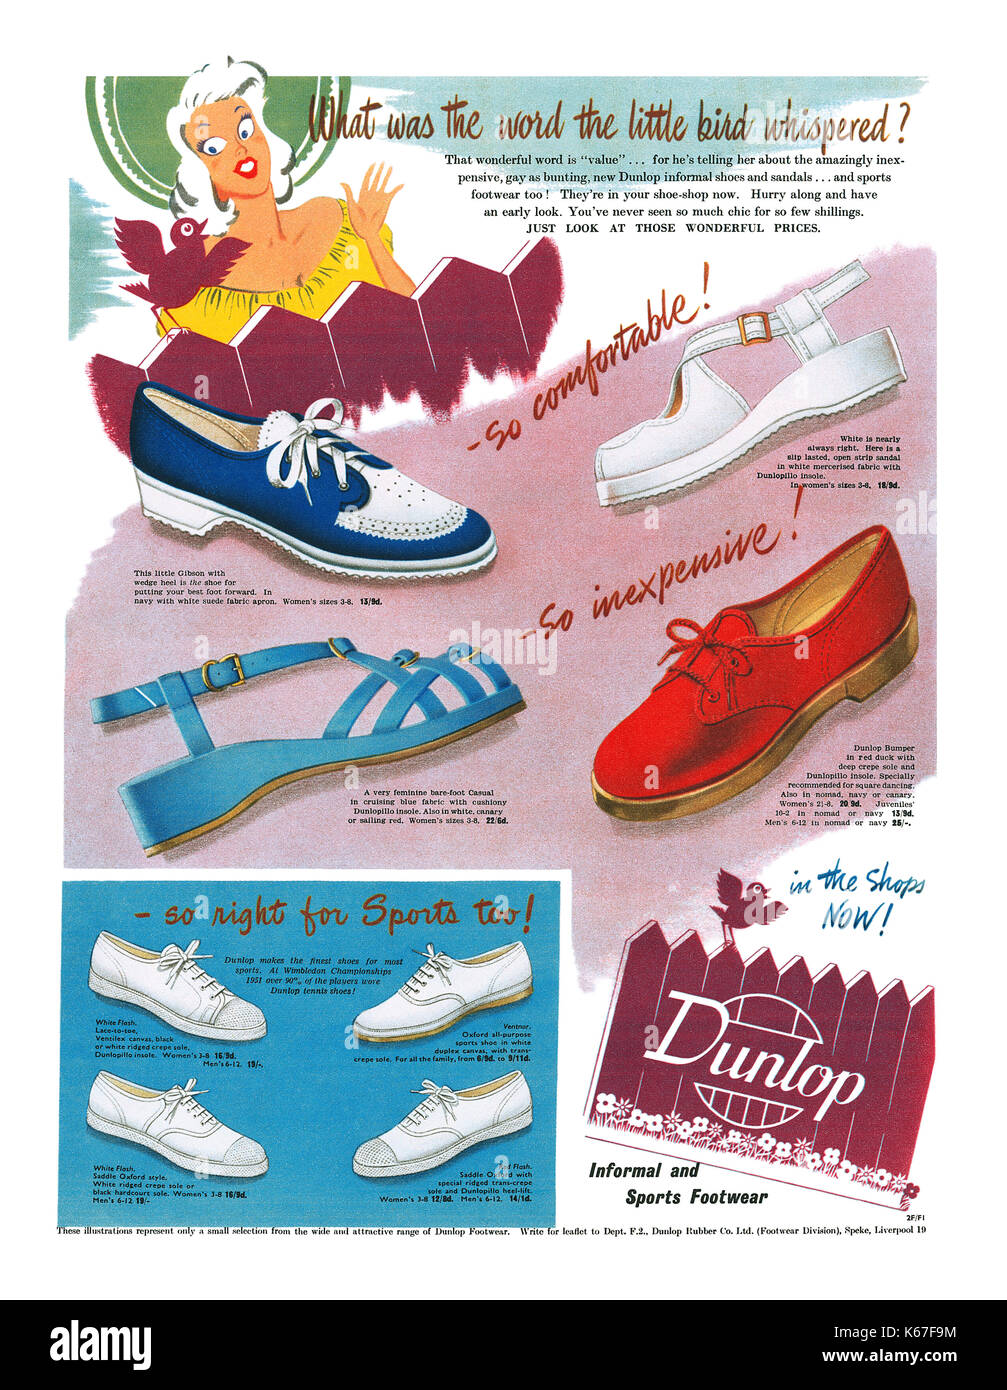 1952 British advertisement for Dunlop shoes Stock Photo - Alamy